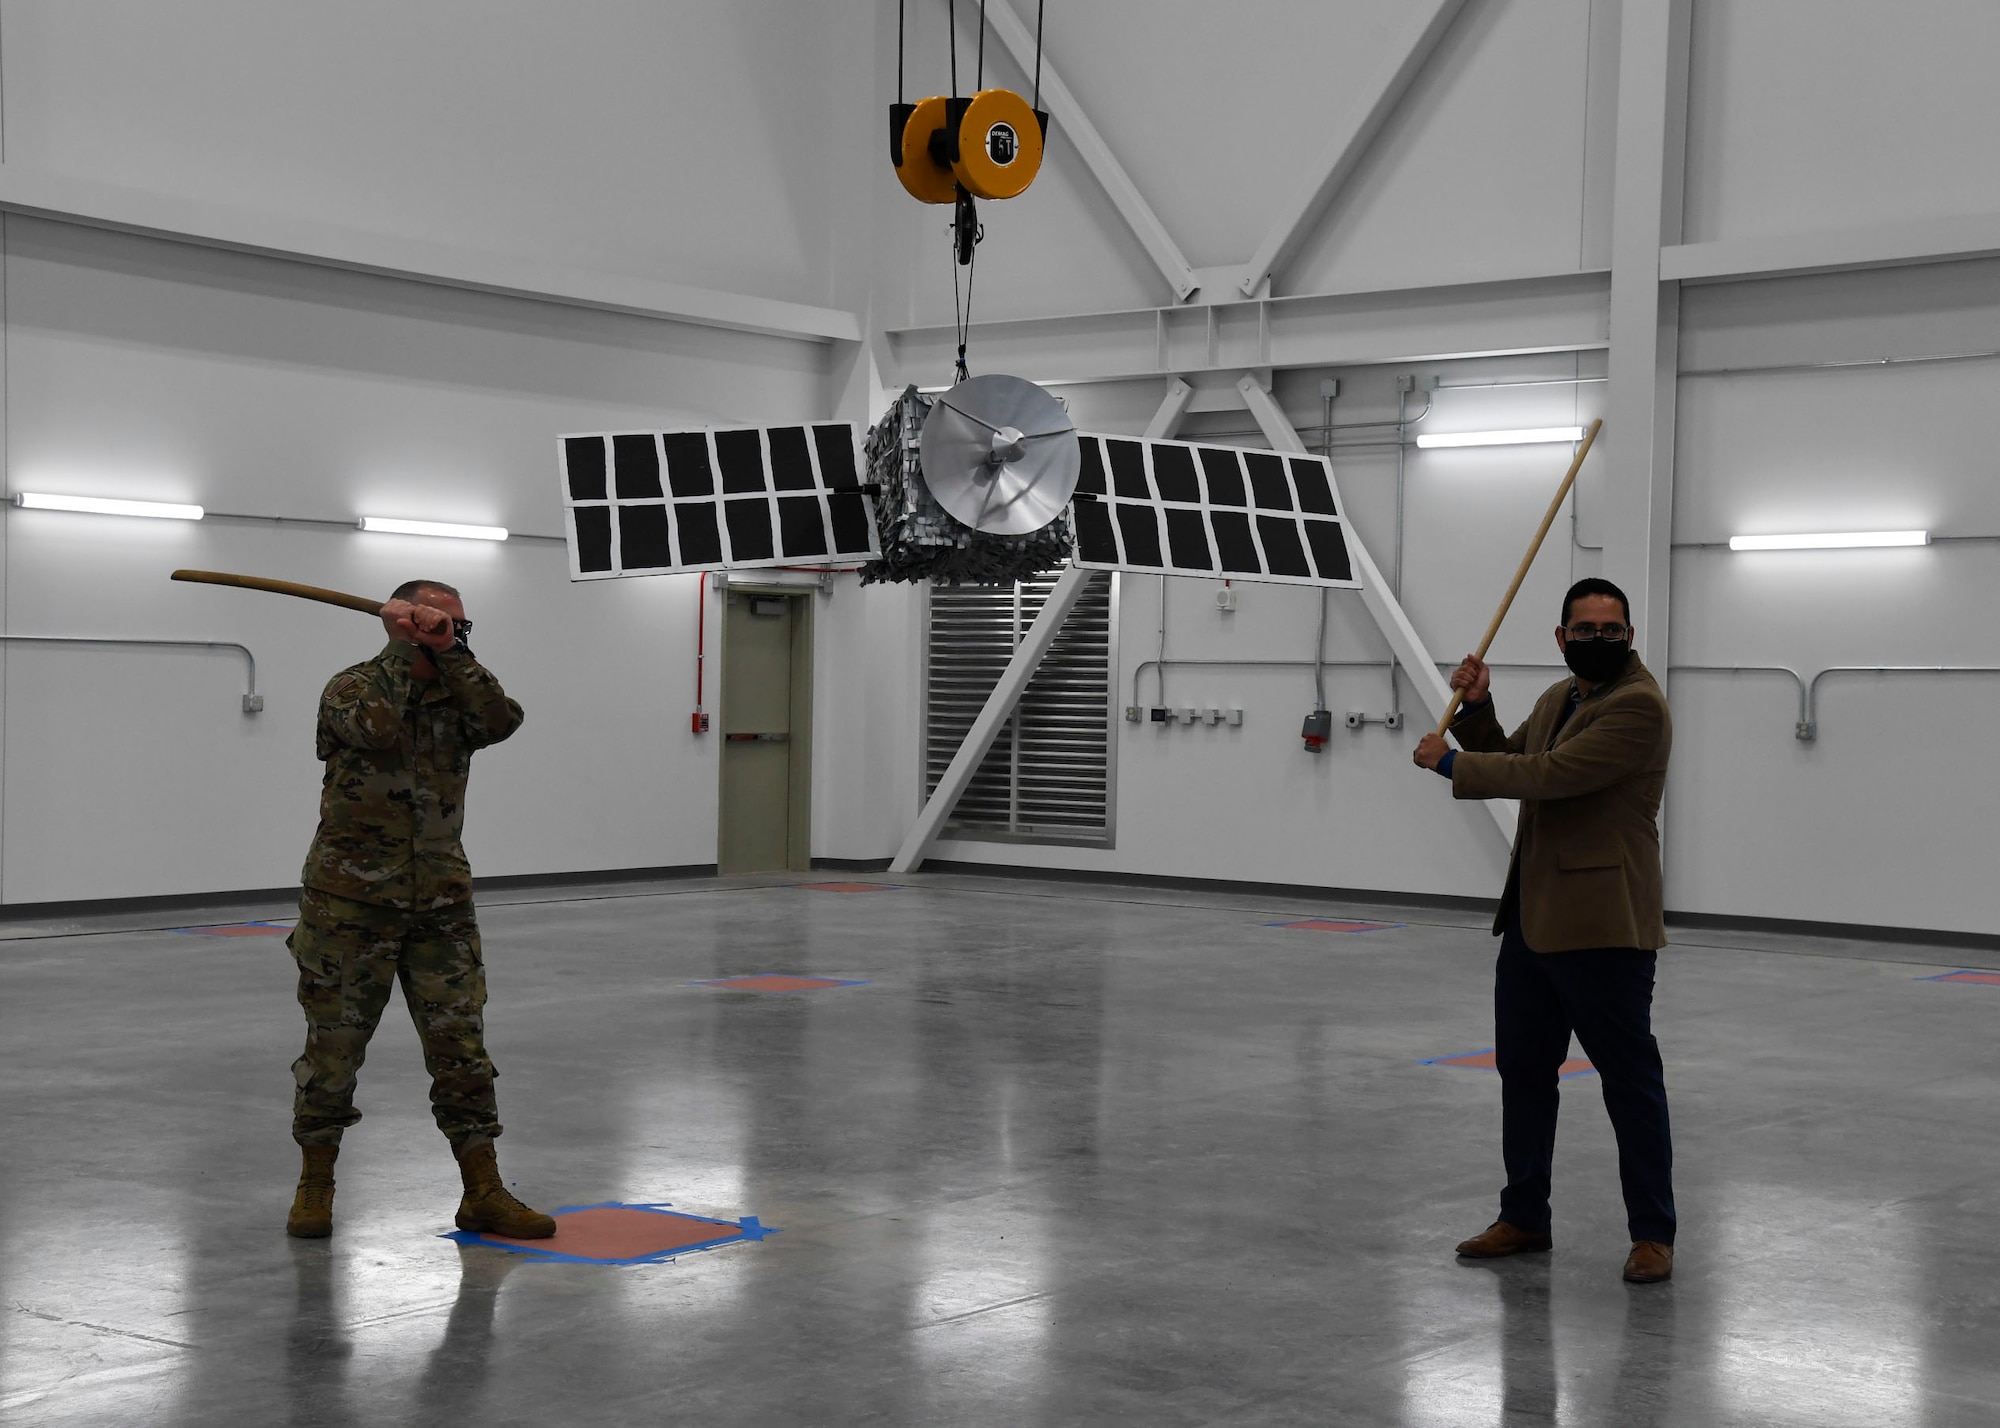 Director of the Air Force Research Laboratory Space Vehicles Directorate, Col. Eric Felt (left) and Benjamin Urioste, research engineer, prepare to break the satellite piñata, following the ribbon cutting ceremony to celebrate the opening of the directorate’s Deployable Structures Laboratory at Kirtland Air Force Base, New Mexico, Oct. 29, 2020. (U.S. Air Force photo by Airman 1st Class Ireland Summers)